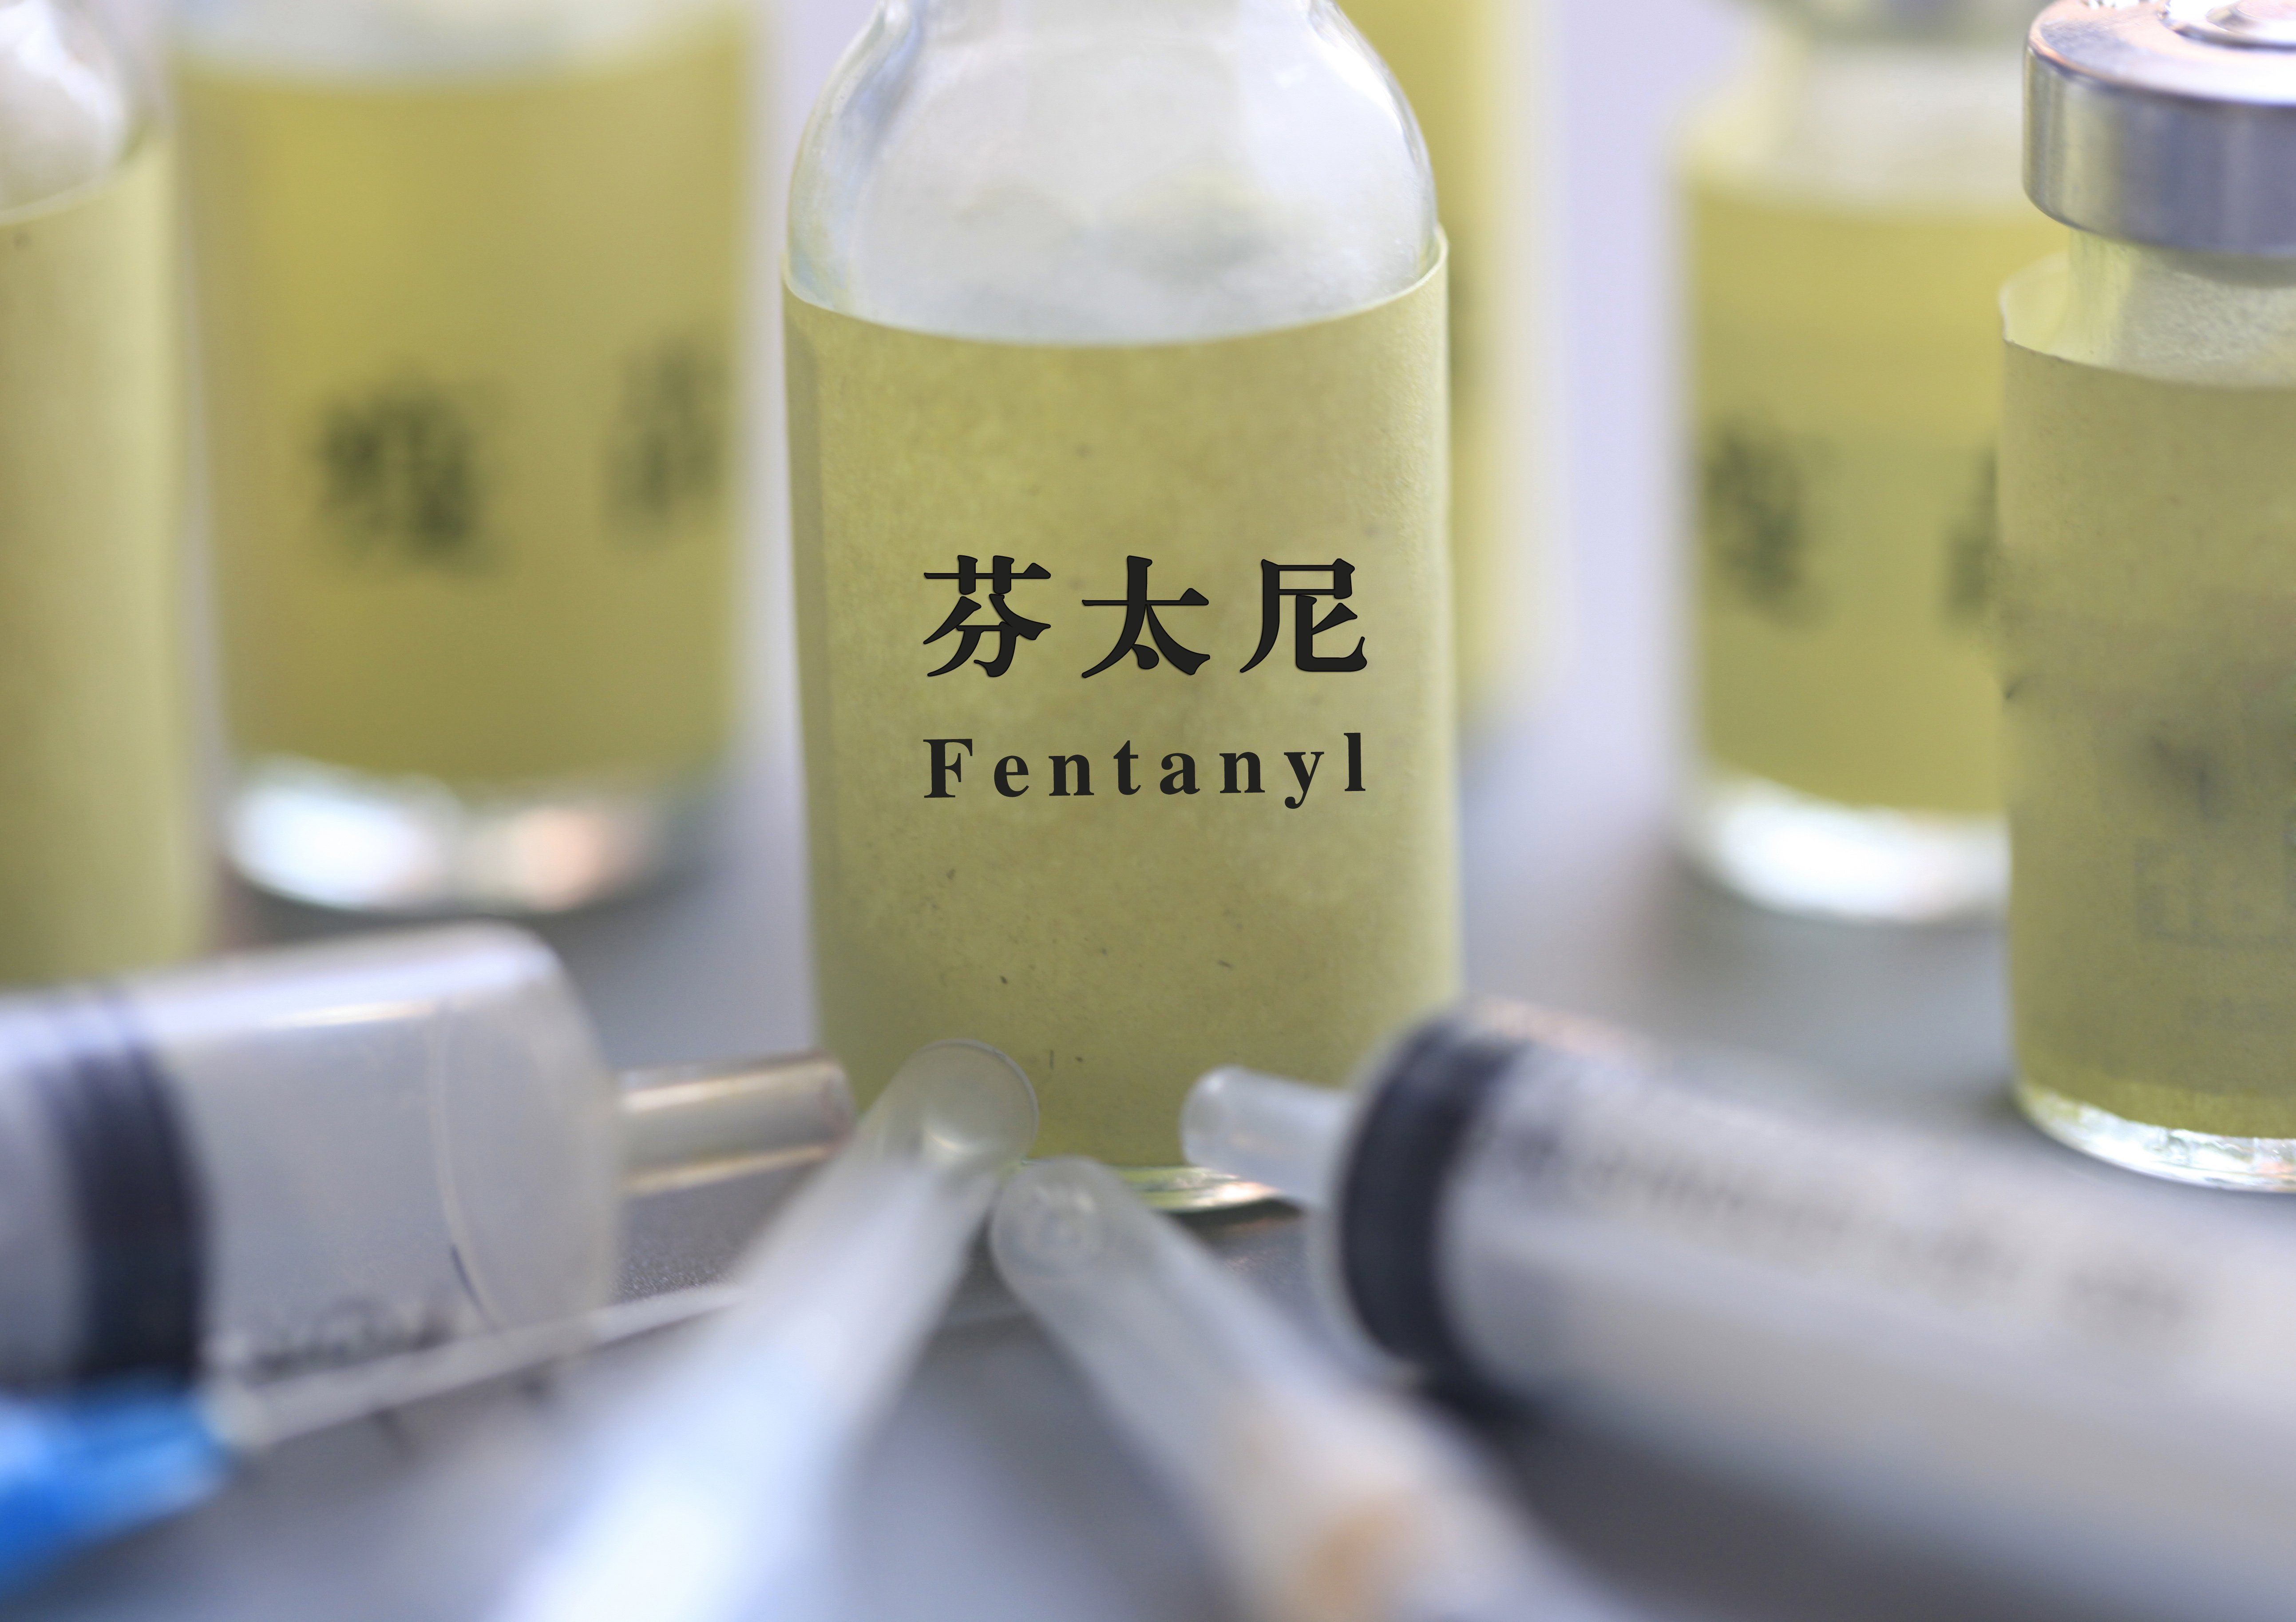 A bottle of Fentanyl pharmaceuticals is displayed in Anyang city